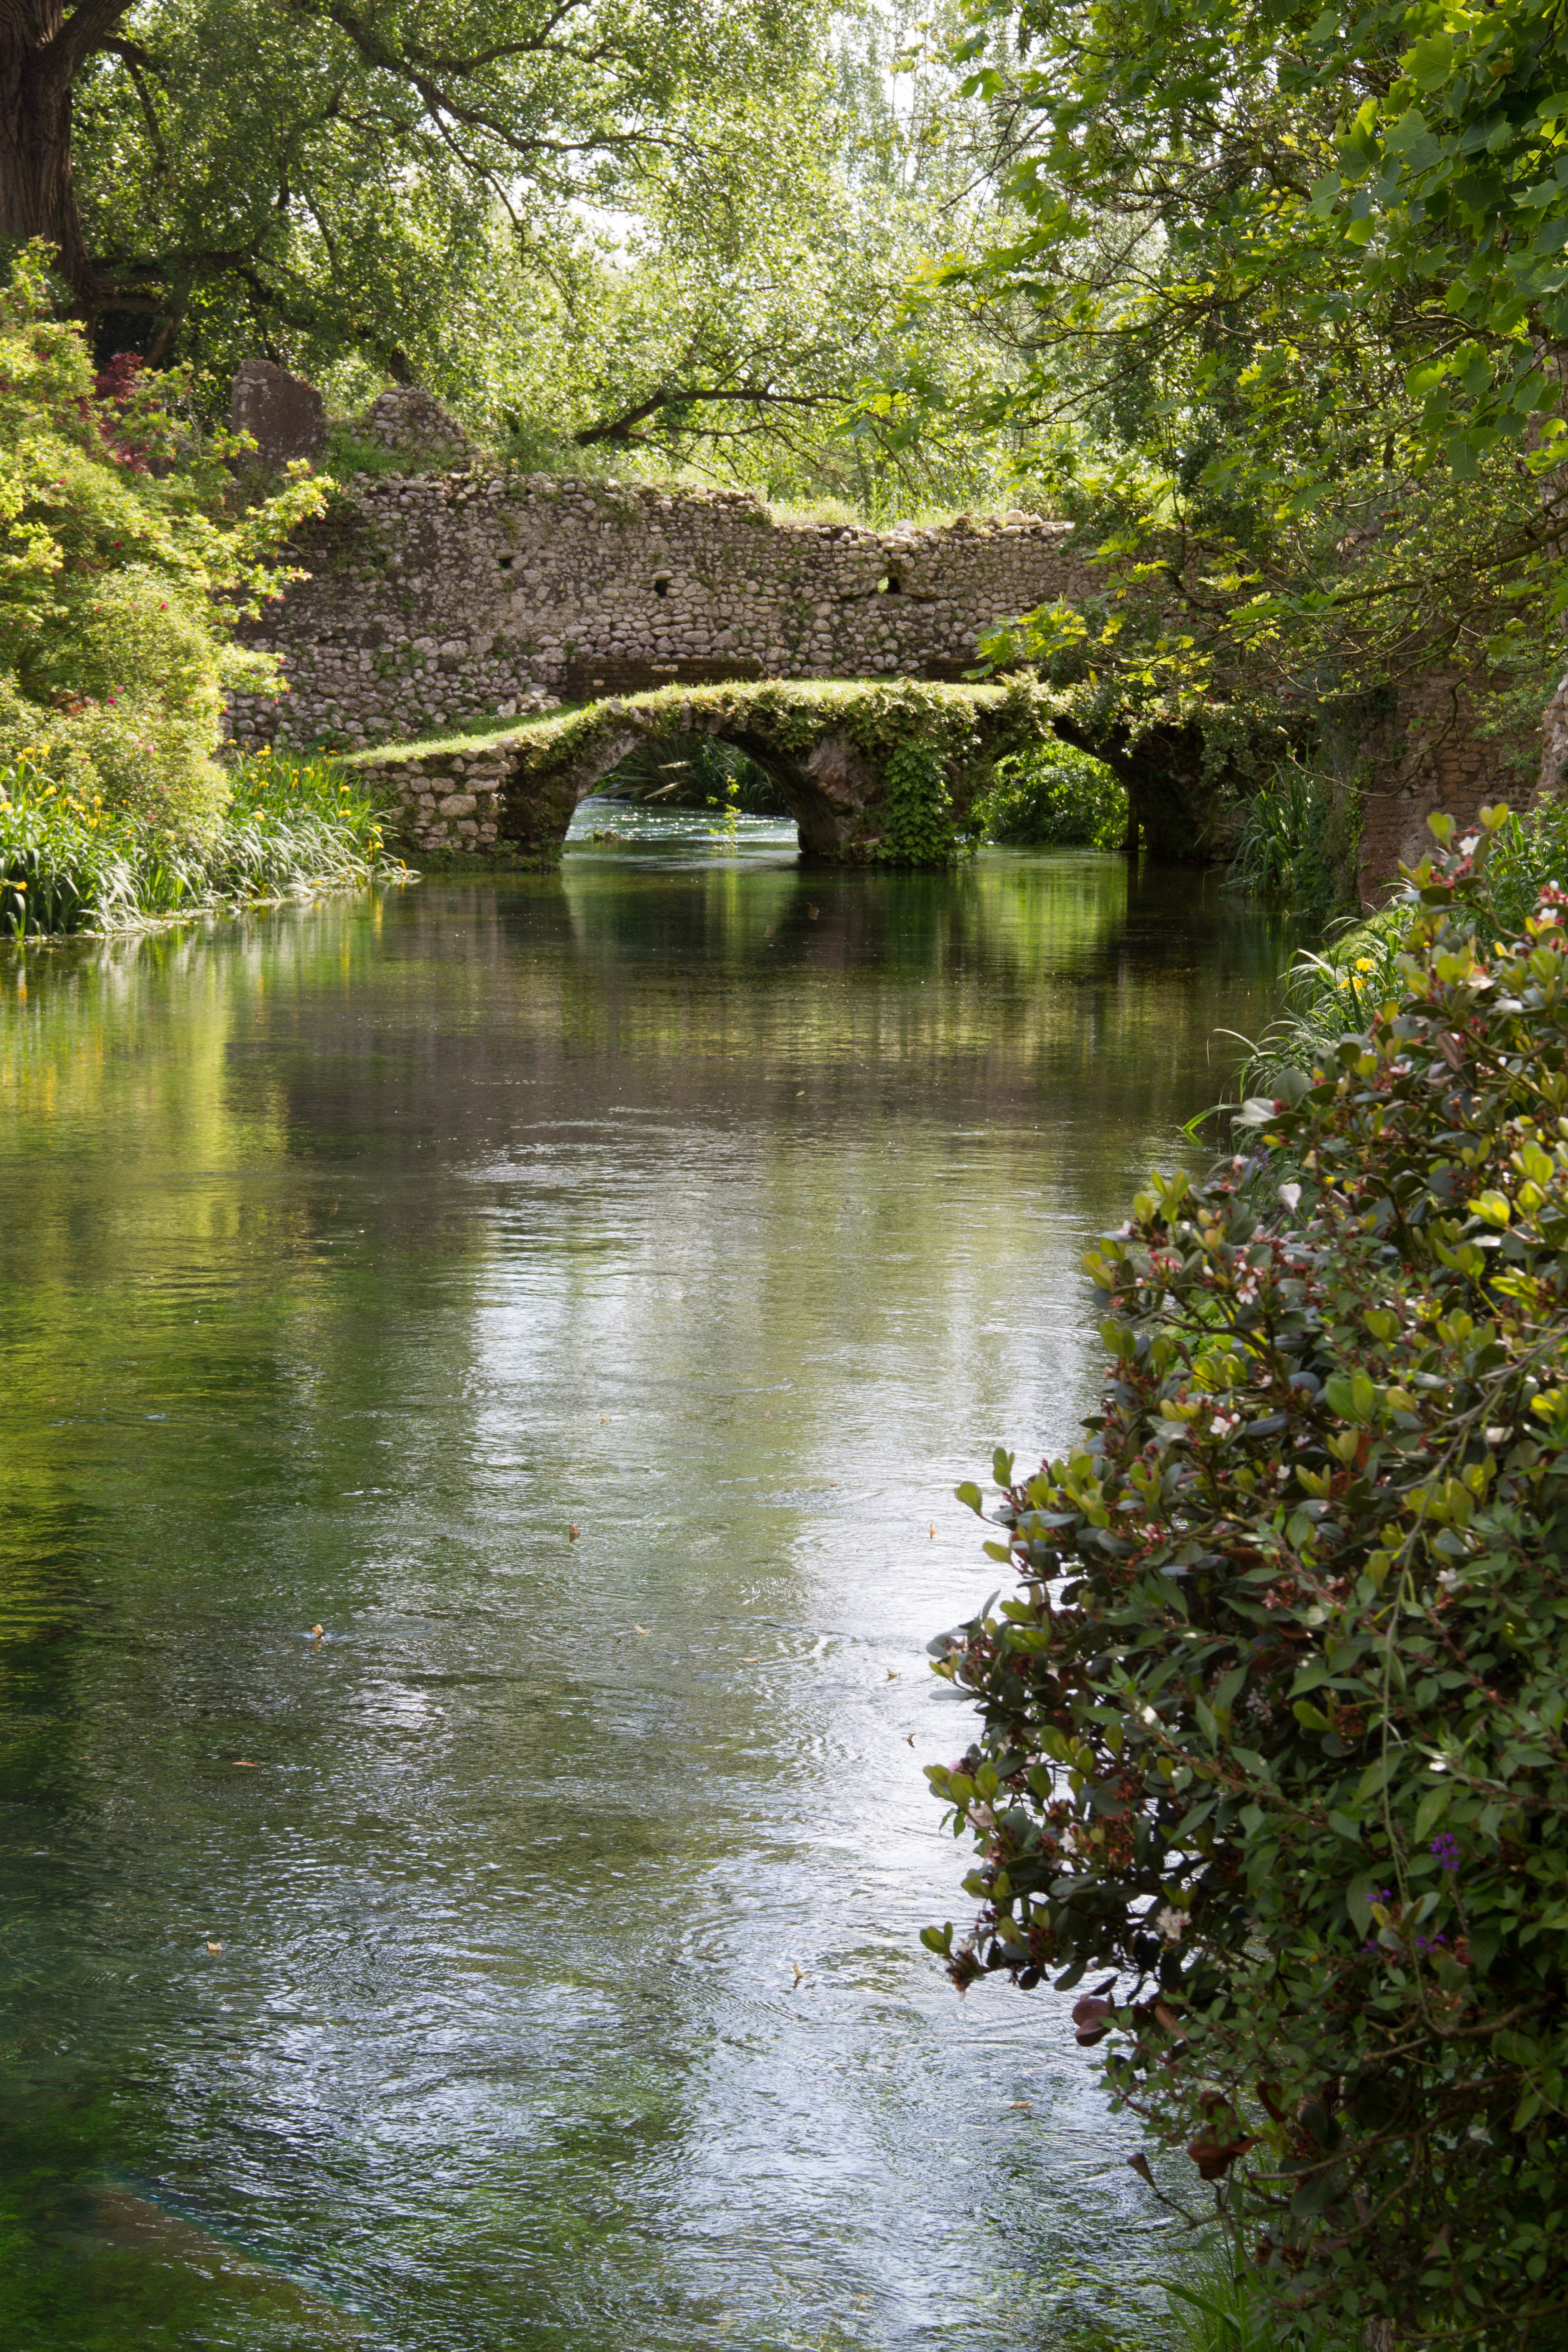 The arched bridge at Ninfa is probably the most photographed spot in the whole garden.